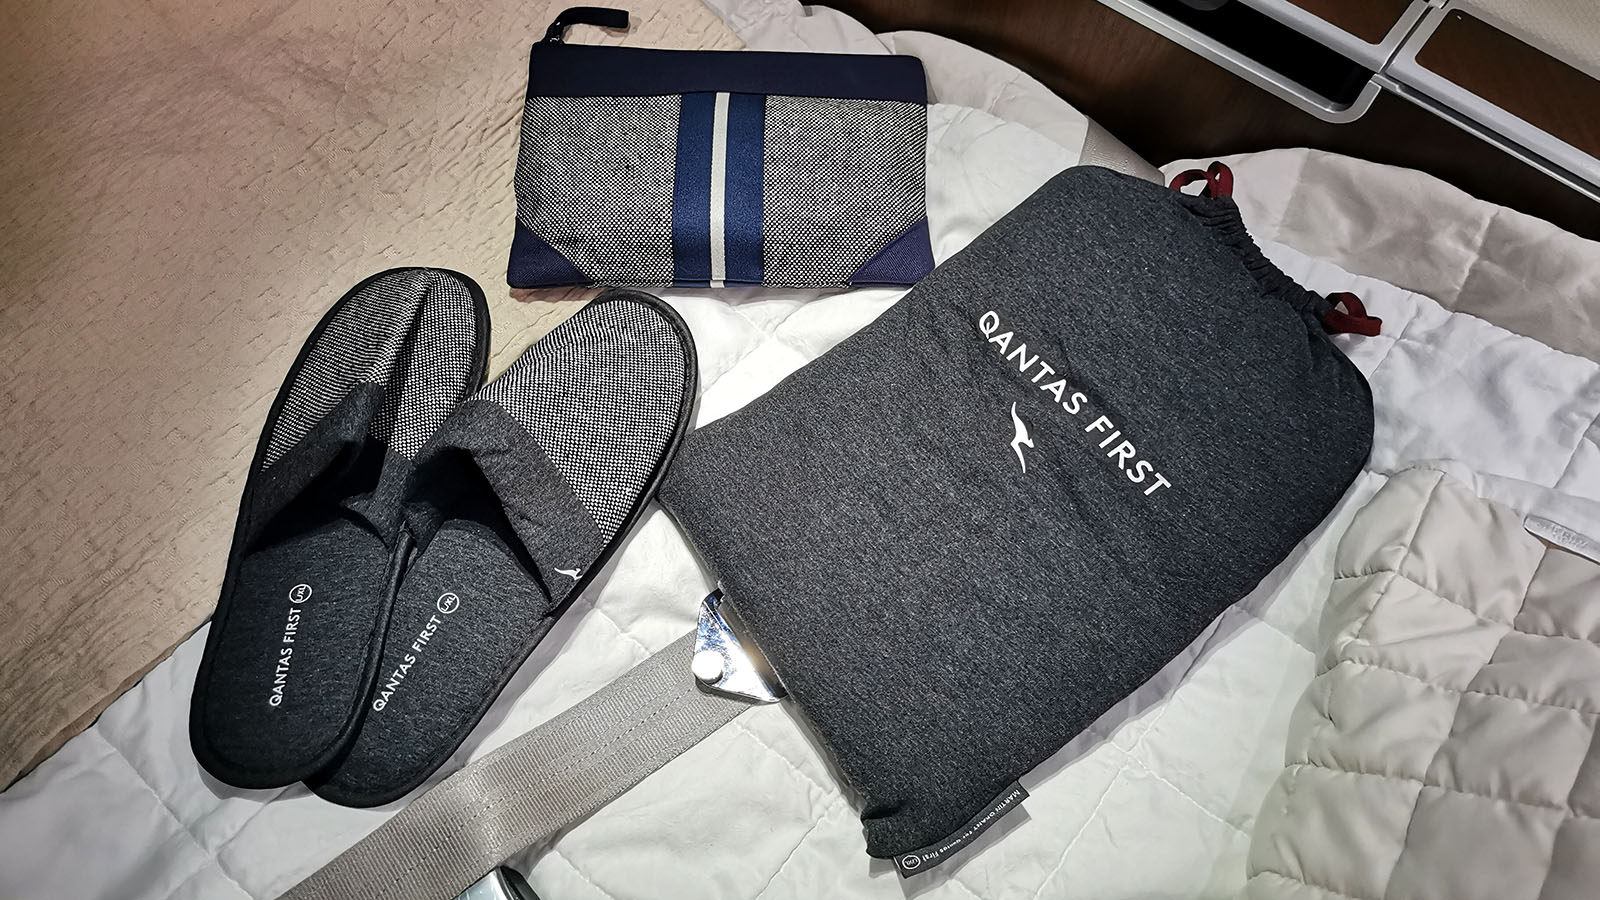 Pyjamas, slippers and amenity kit in Qantas Airbus A380 First